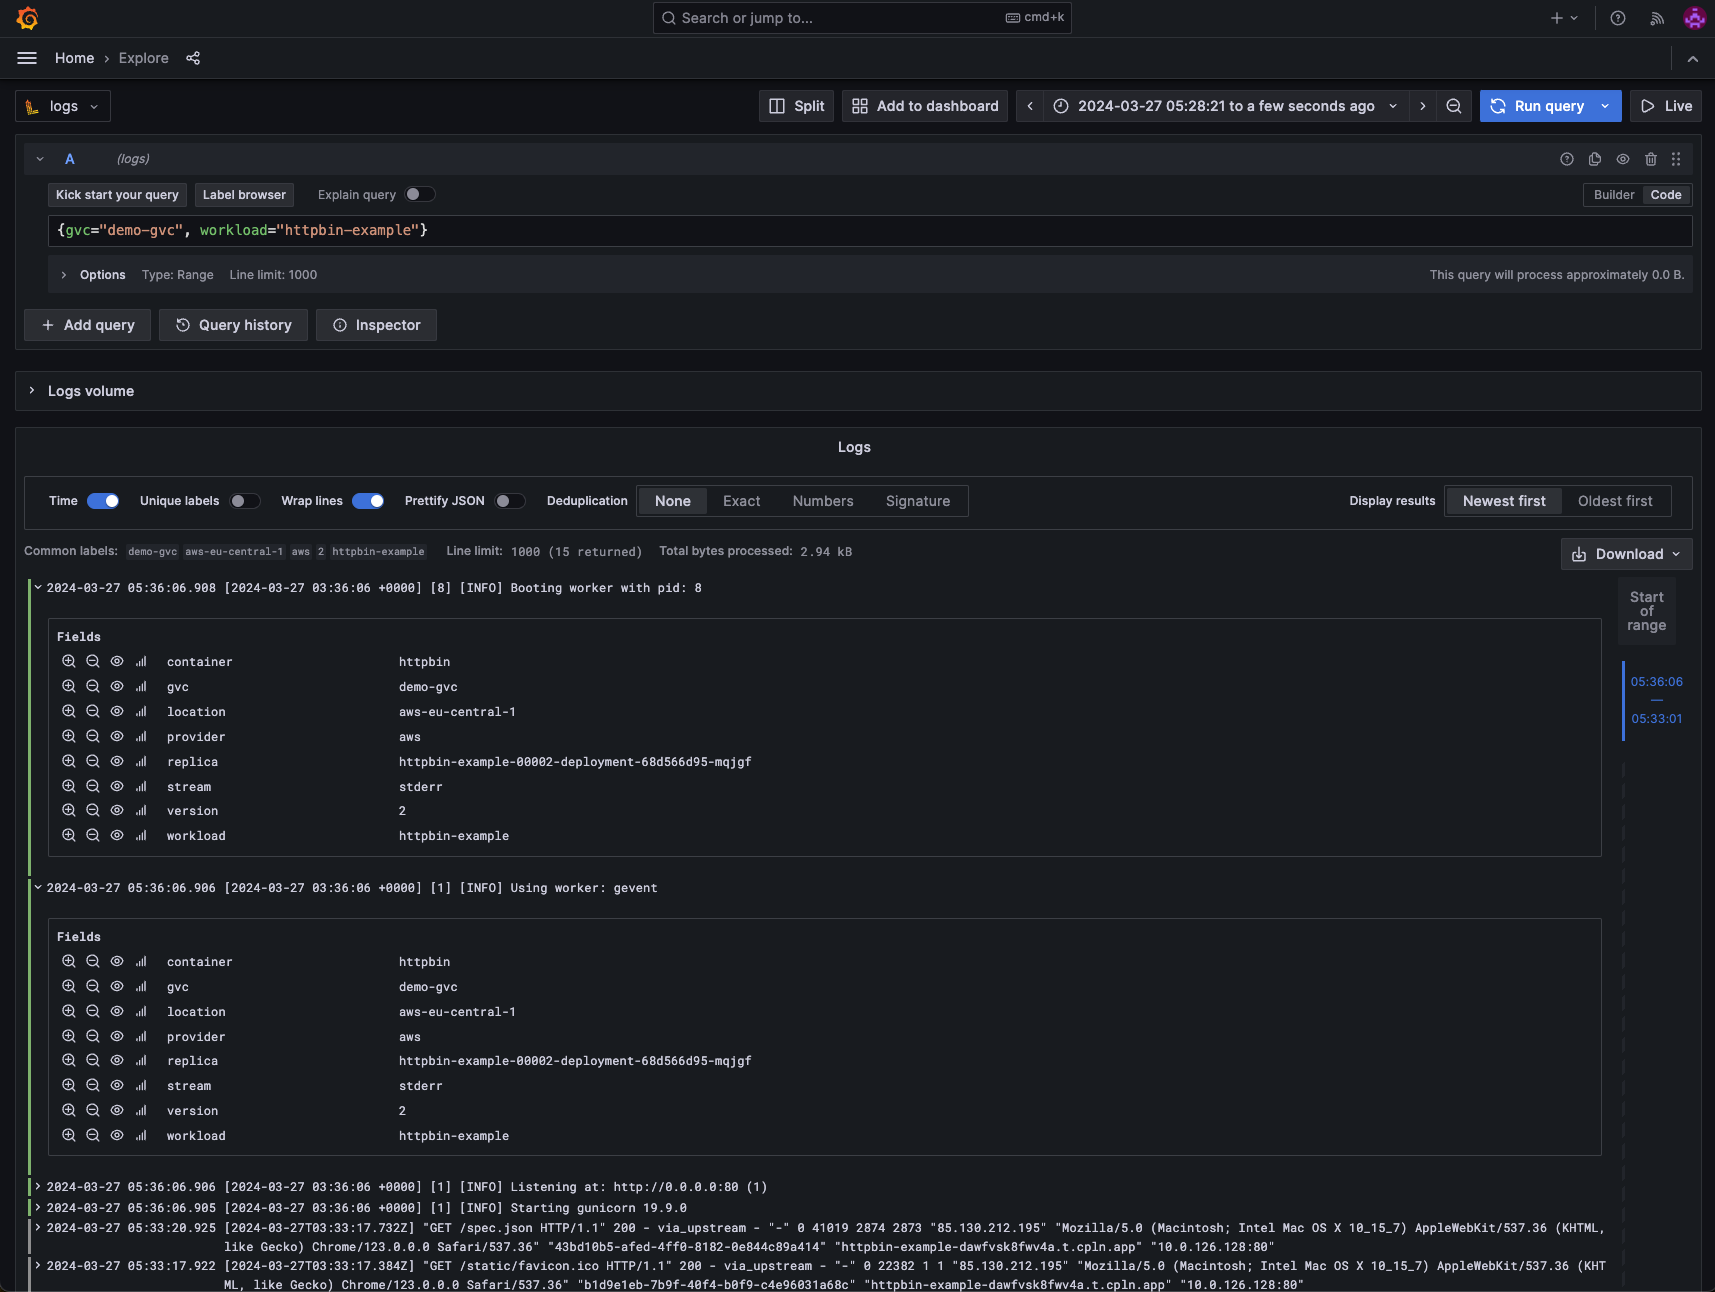 Screenshot shows the Grafana explorer interface, a popular open-source platform, which is fully integrated into Control Plane.